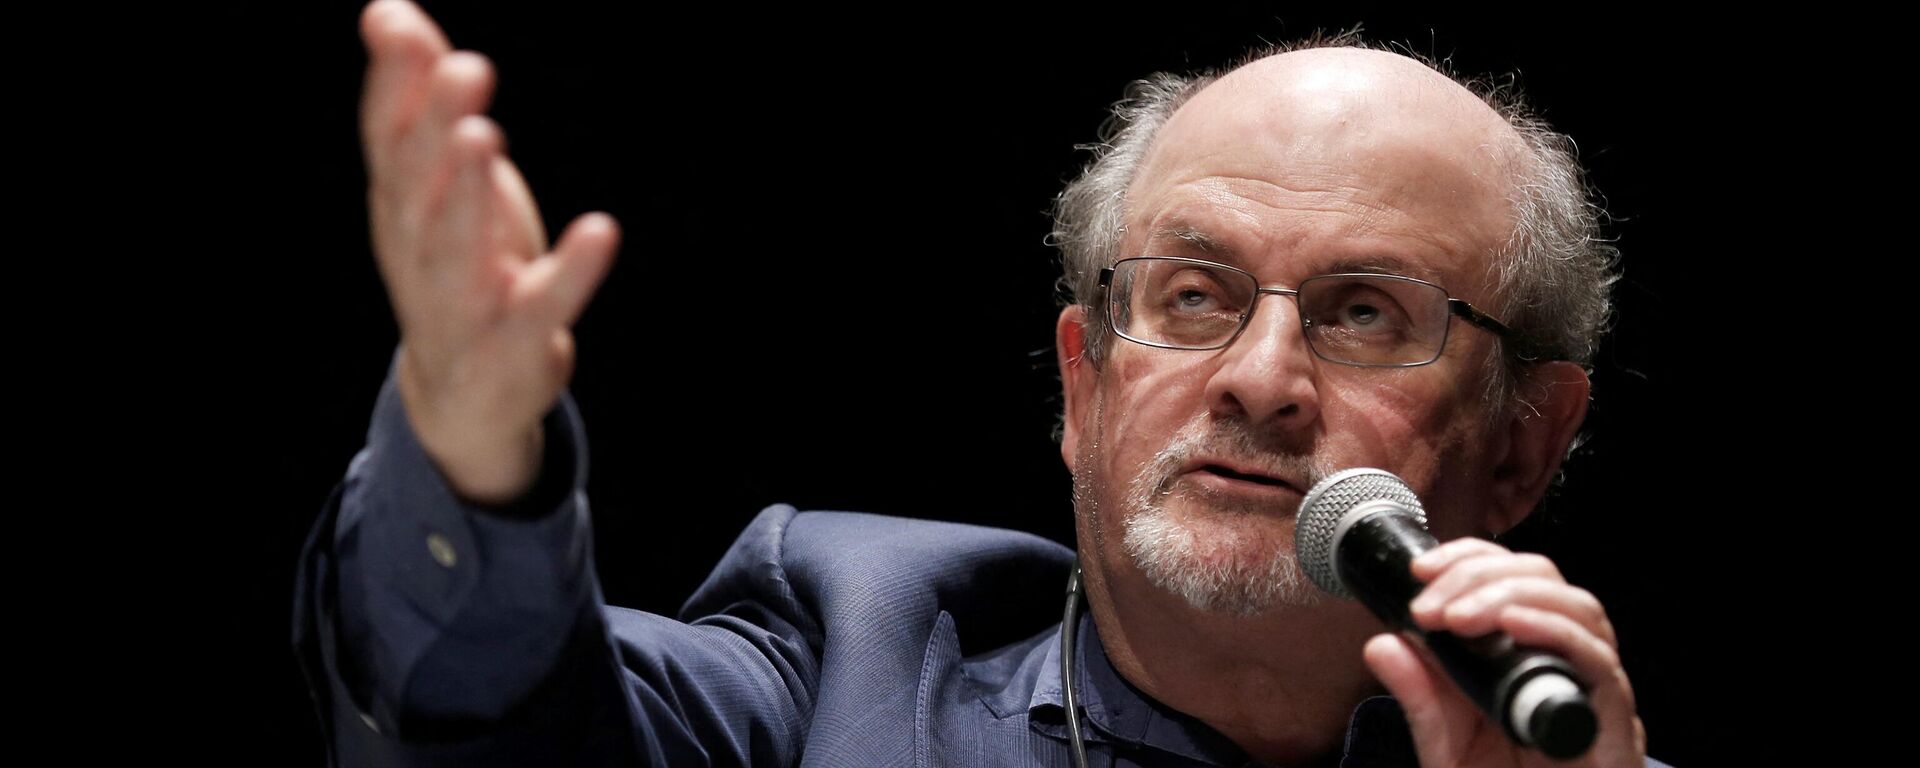 In this file photo taken on September 13, 2016, British writer Salman Rushdie speaks during the opening day of the Positive Economy Forum in Le Havre, northwestern France on September 13, 2016. - It has been reported that Rushdie was attacked on stage today during an event in New York. (Photo by CHARLY TRIBALLEAU / AFP) - Sputnik International, 1920, 12.08.2022